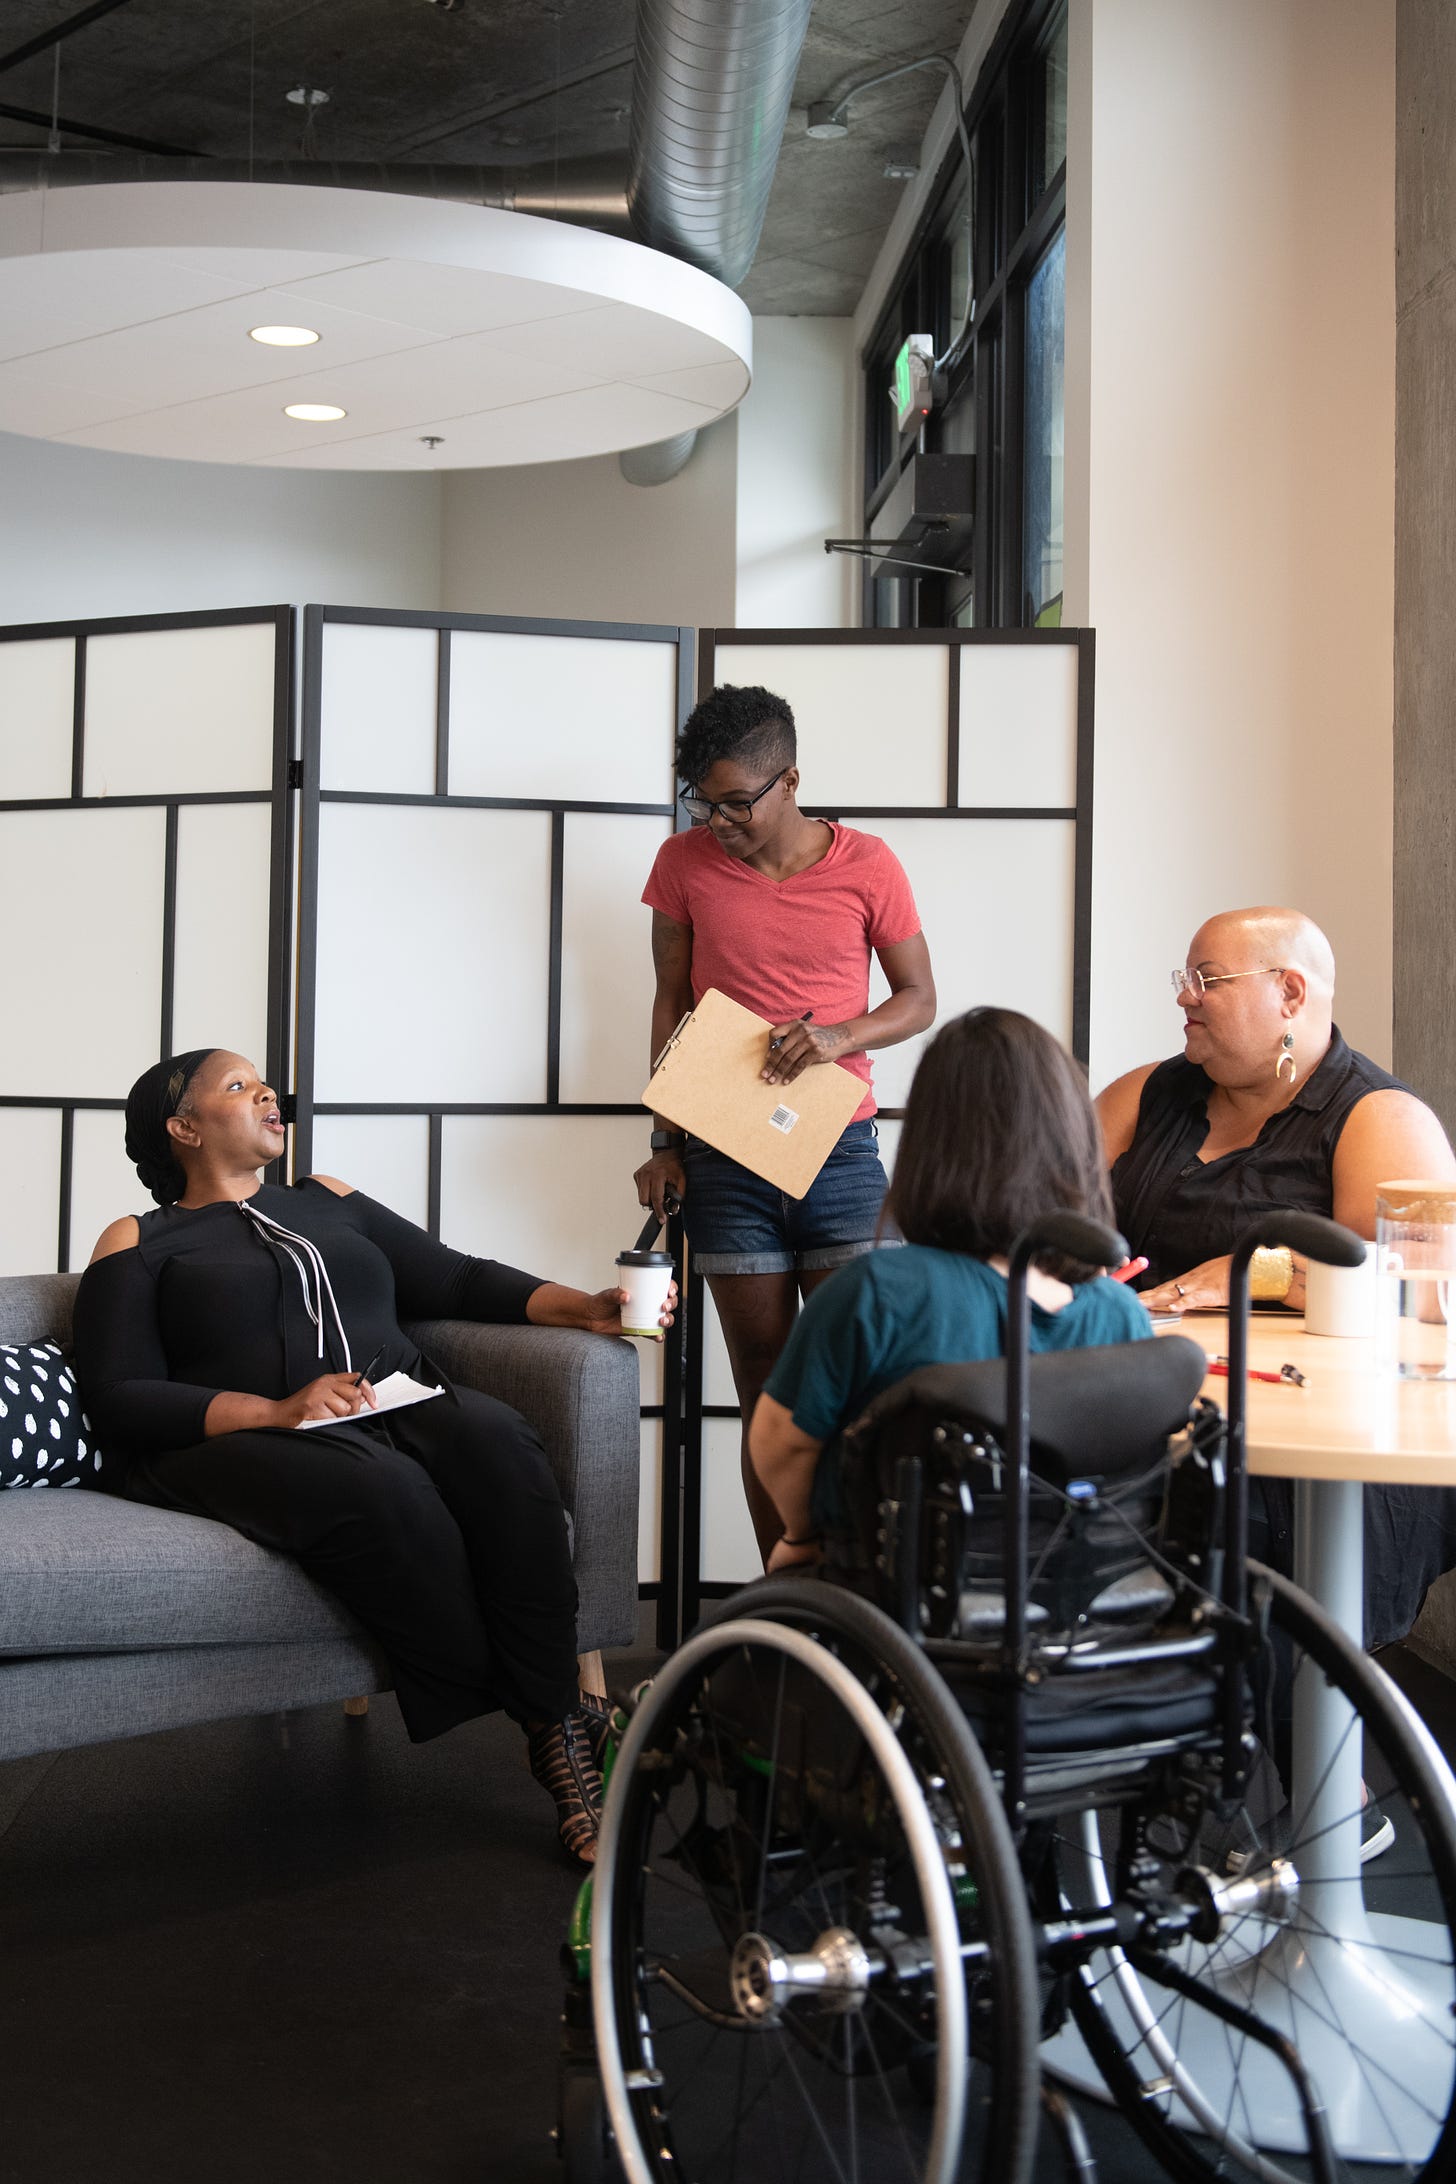 four disabled people of color gather around a table during a meeting. A Black woman sitting on a couch gestures and speaks while the three others (a South Asian person sitting in a wheelchair, a Black non-binary person sitting in a chair, and a Black non-binary person standing with a clipboard and cane) face her and listen. Image Credit: Chona Kasinger via Disabled and Here